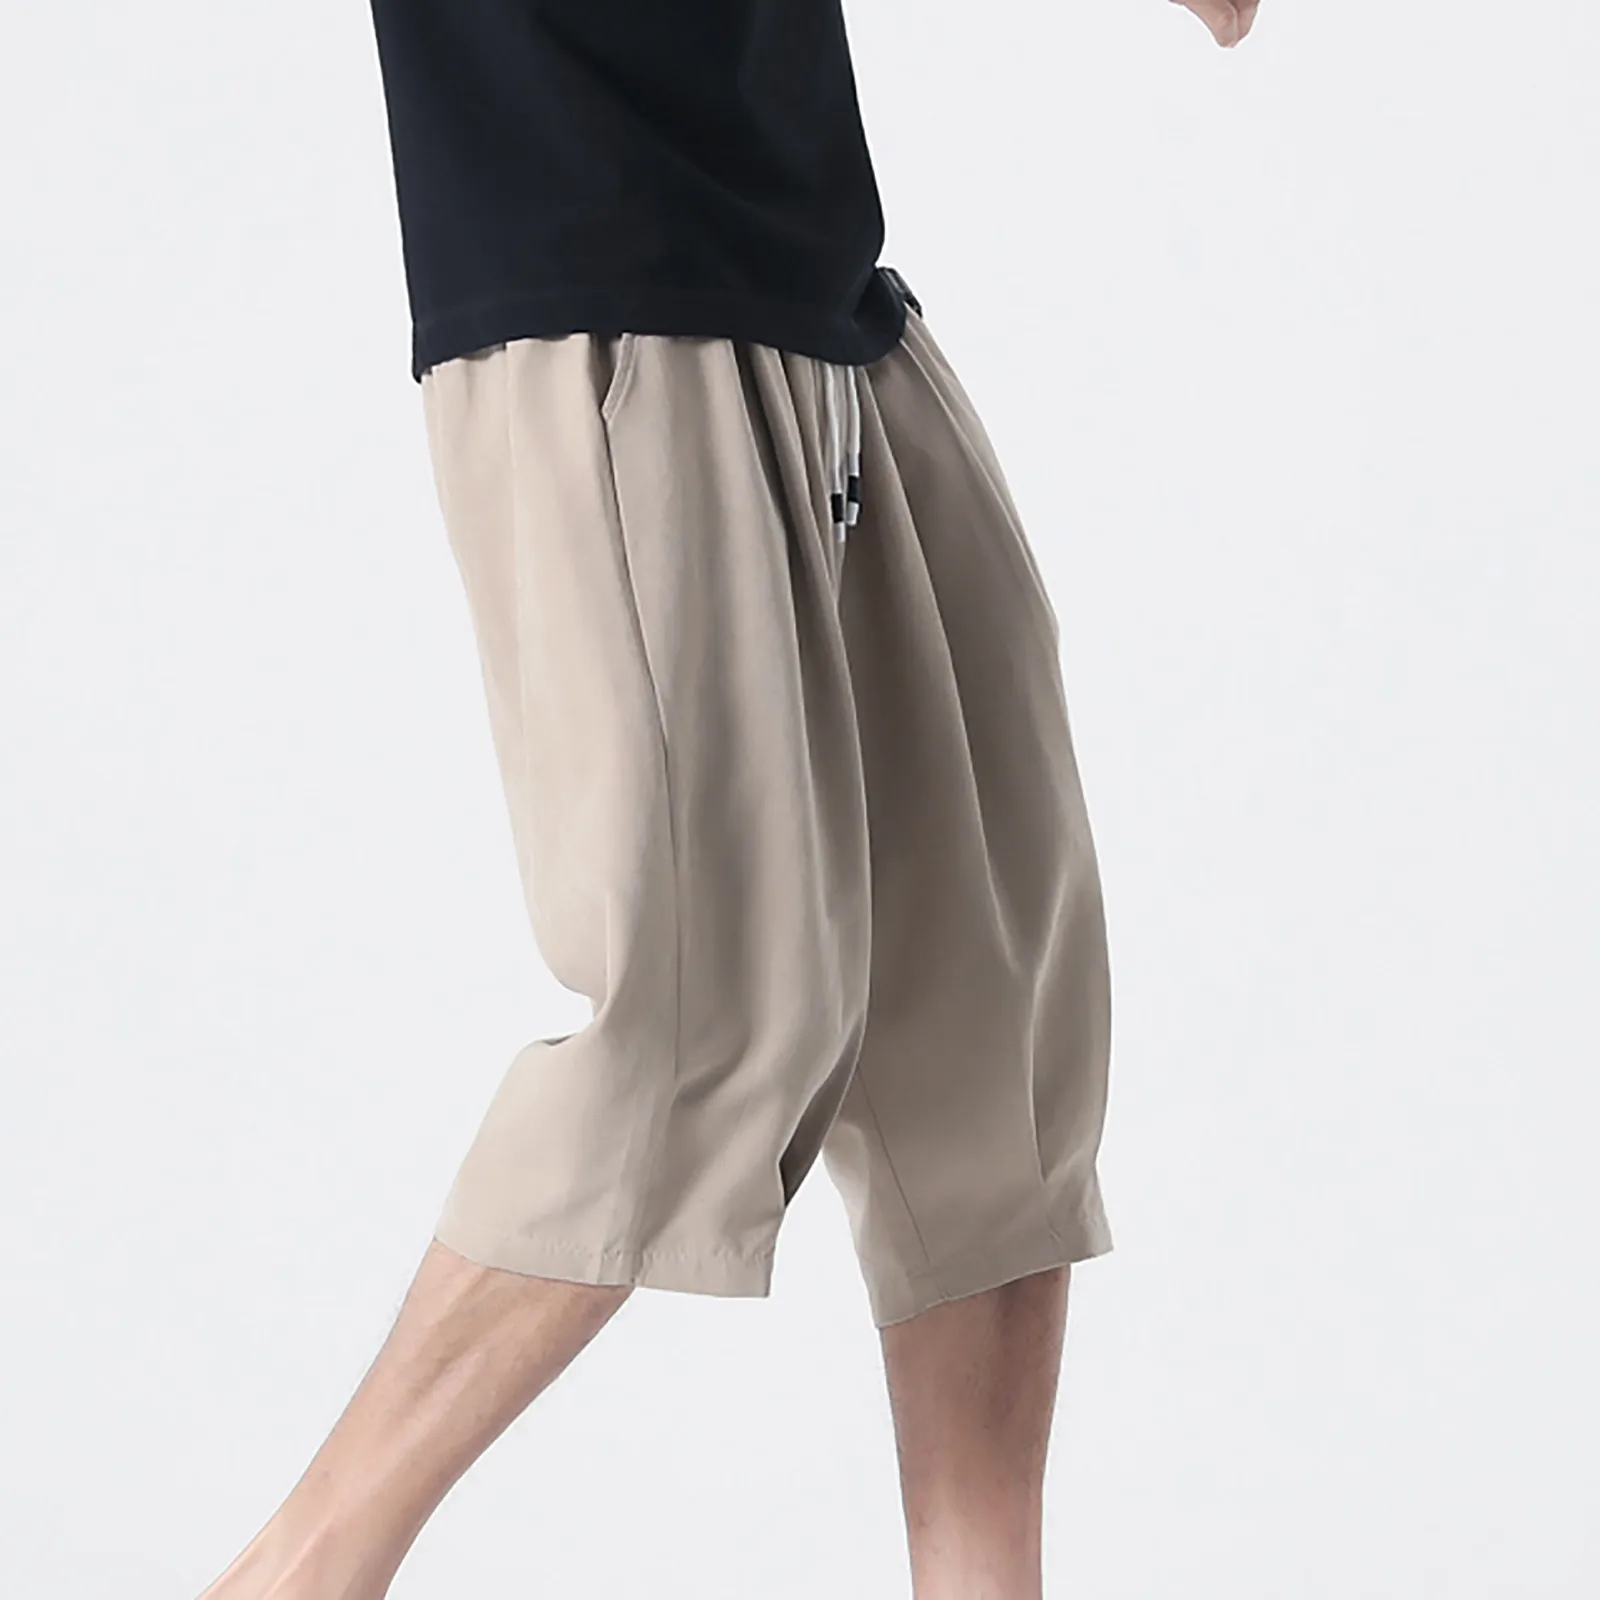 

Men's Fashion Classic Shorts Male Large Size Twill Relaxed Fit Casual Wear Pocket Shorts Pants Short Homme Grande Taille